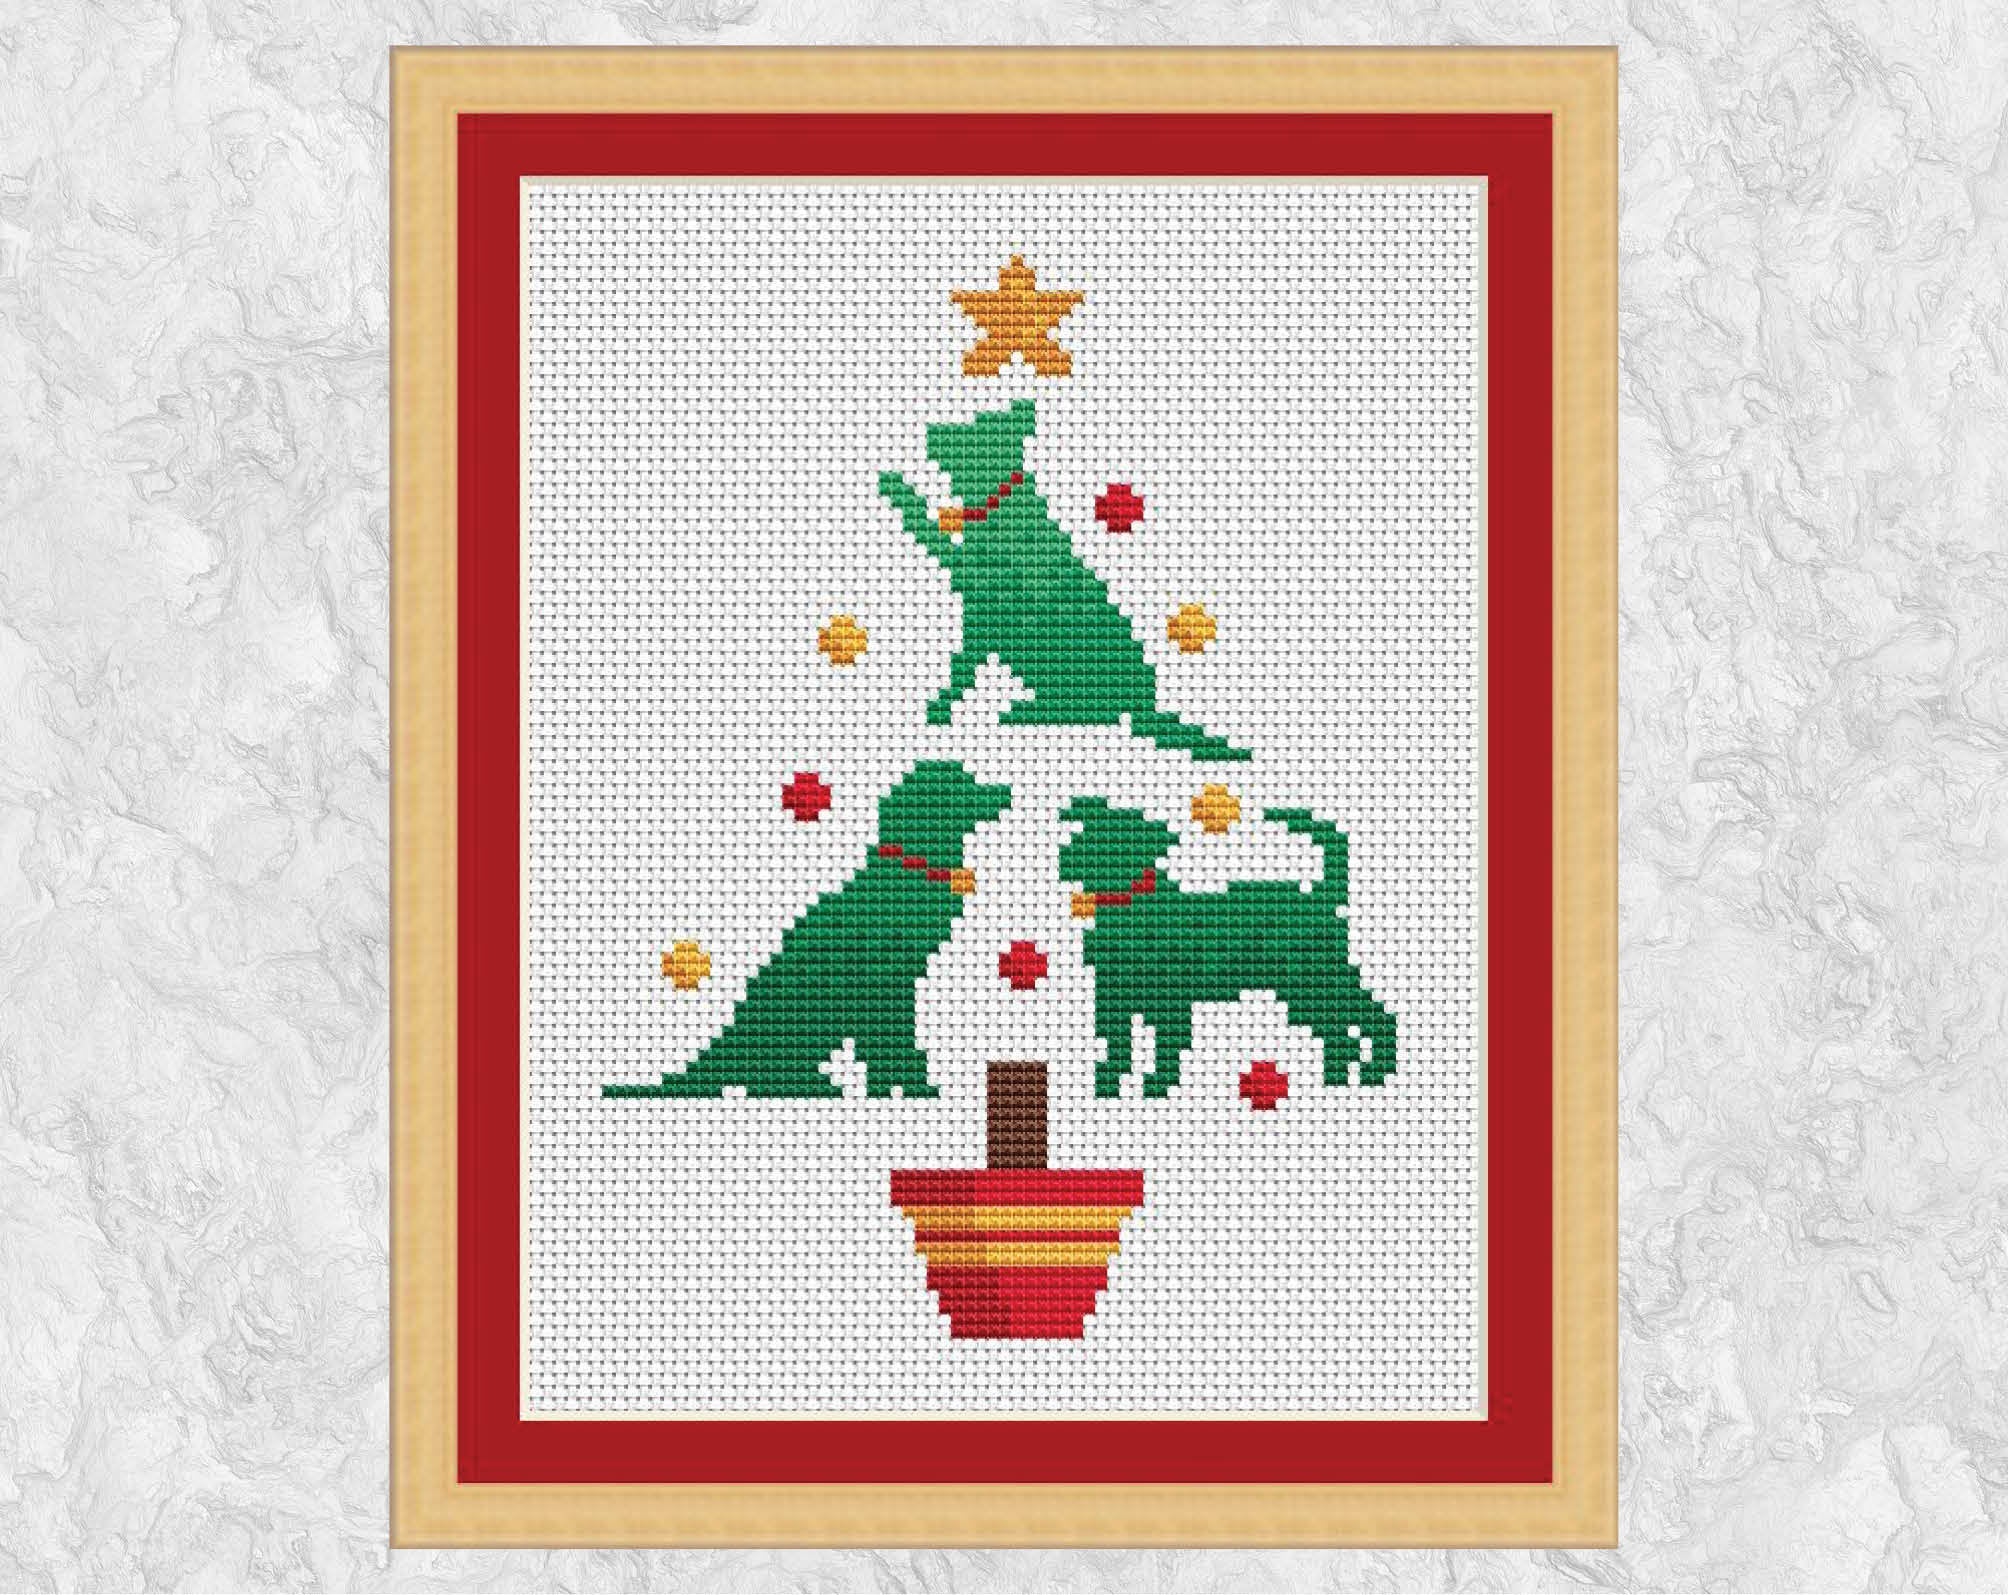 Cross stitch pattern PDF of a Christmas tree made up of dogs - perfect for any dog lover! Card sized version with three dog silhouettes. Shown with frame.